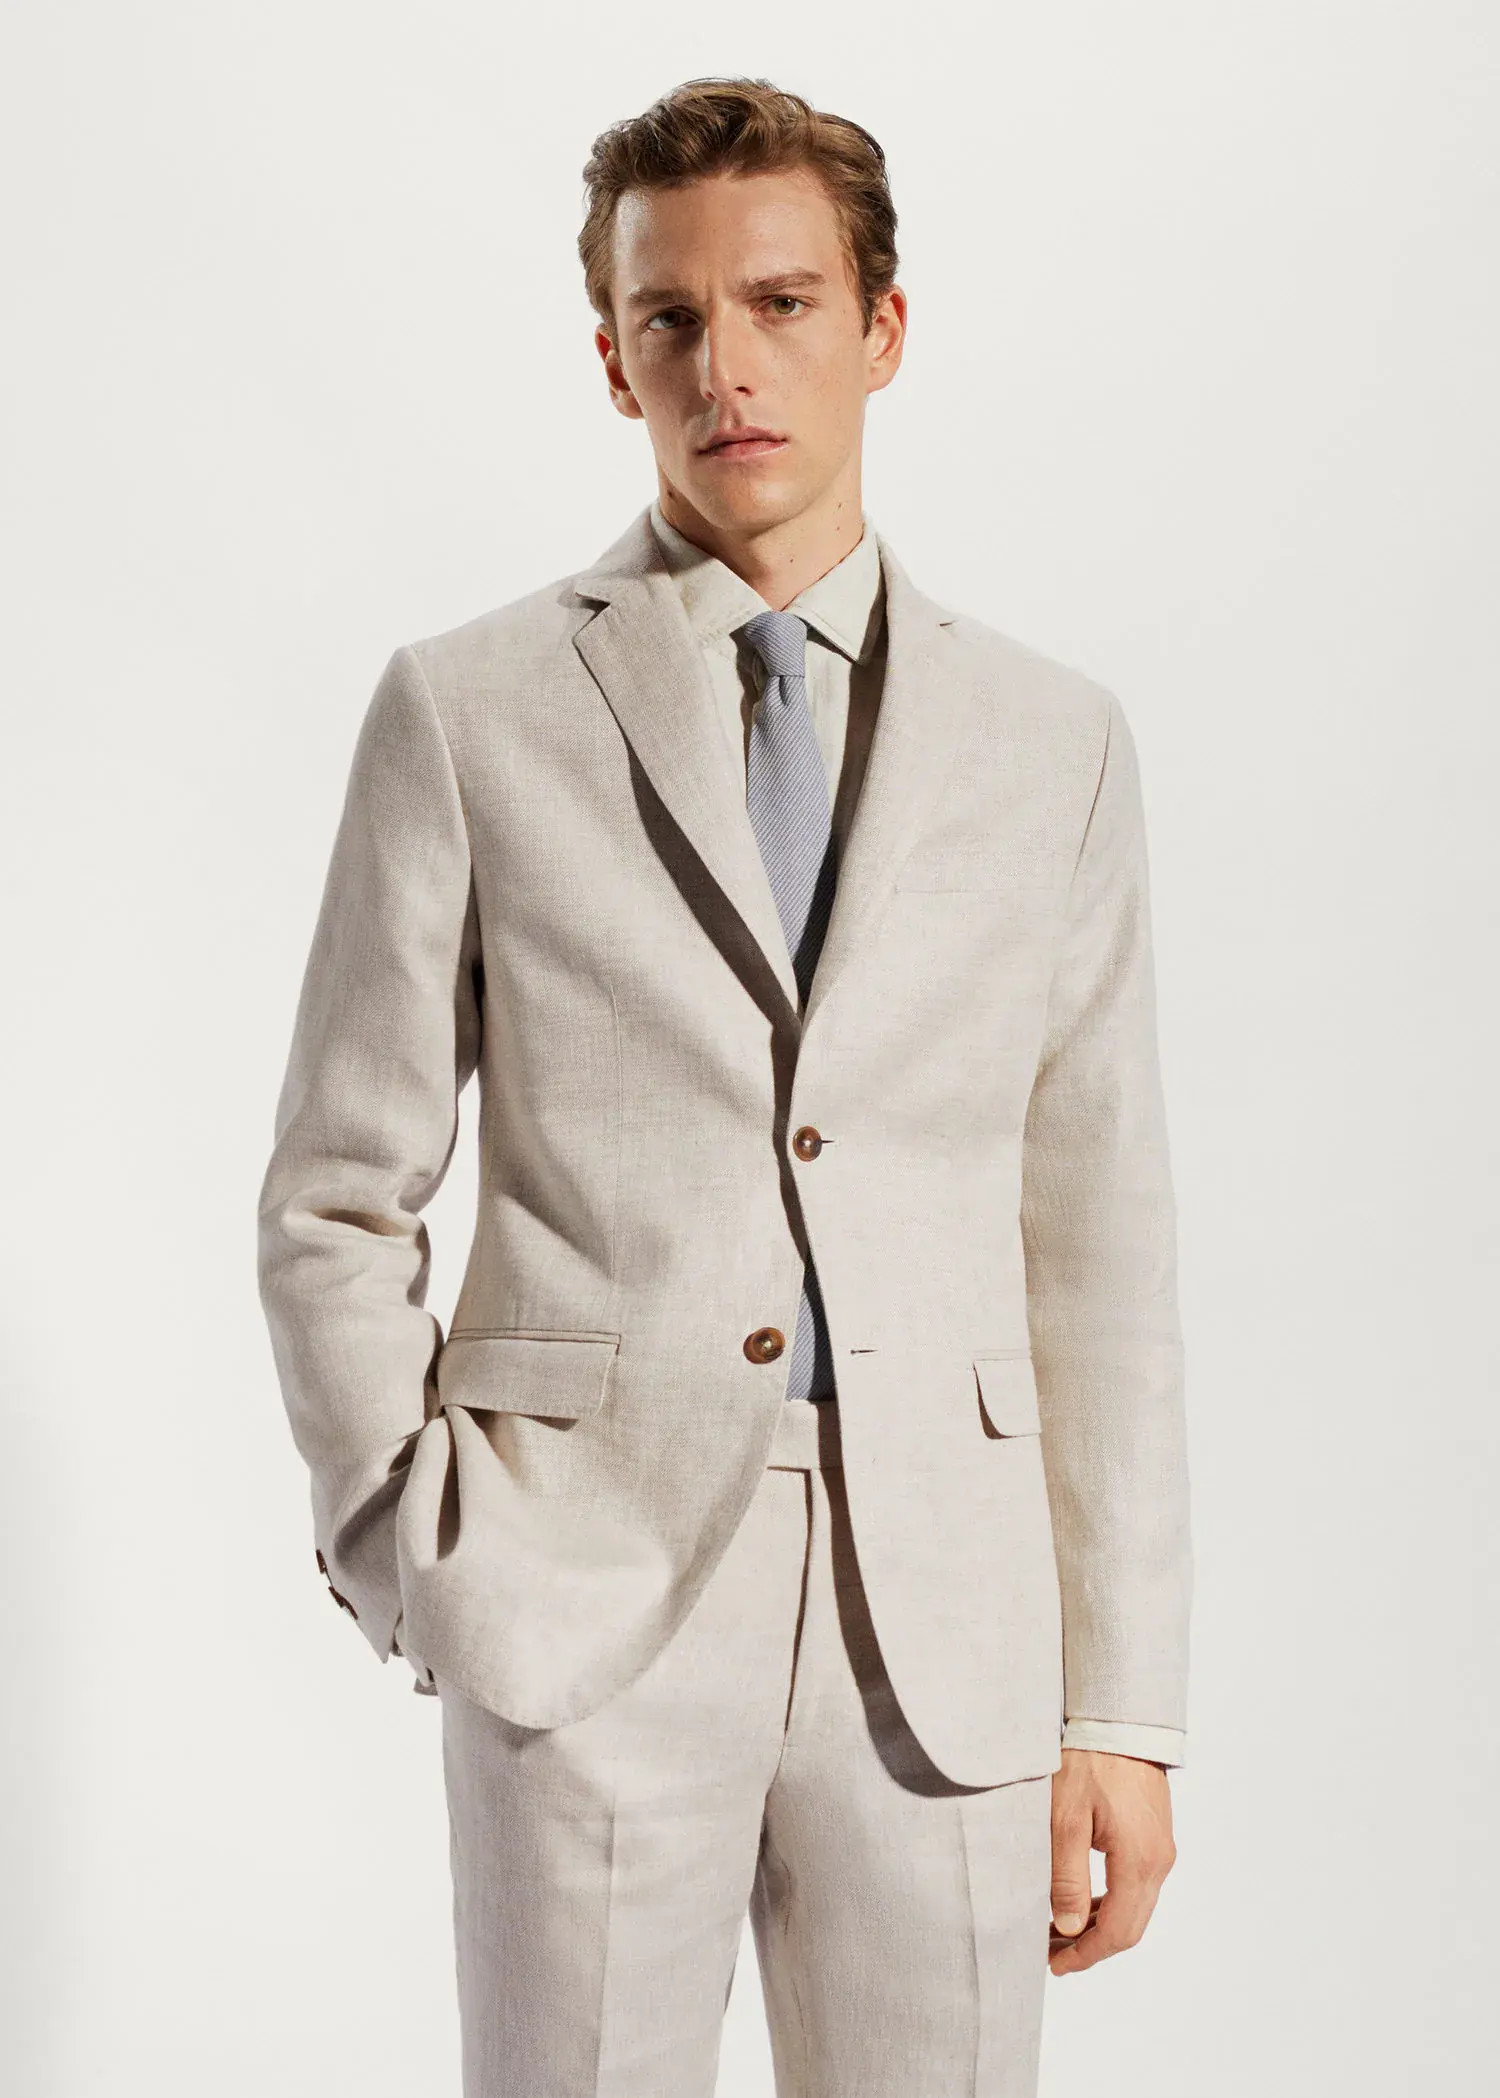 Mango 100% linen suit blazer. a man wearing a suit and tie standing in front of a wall. 